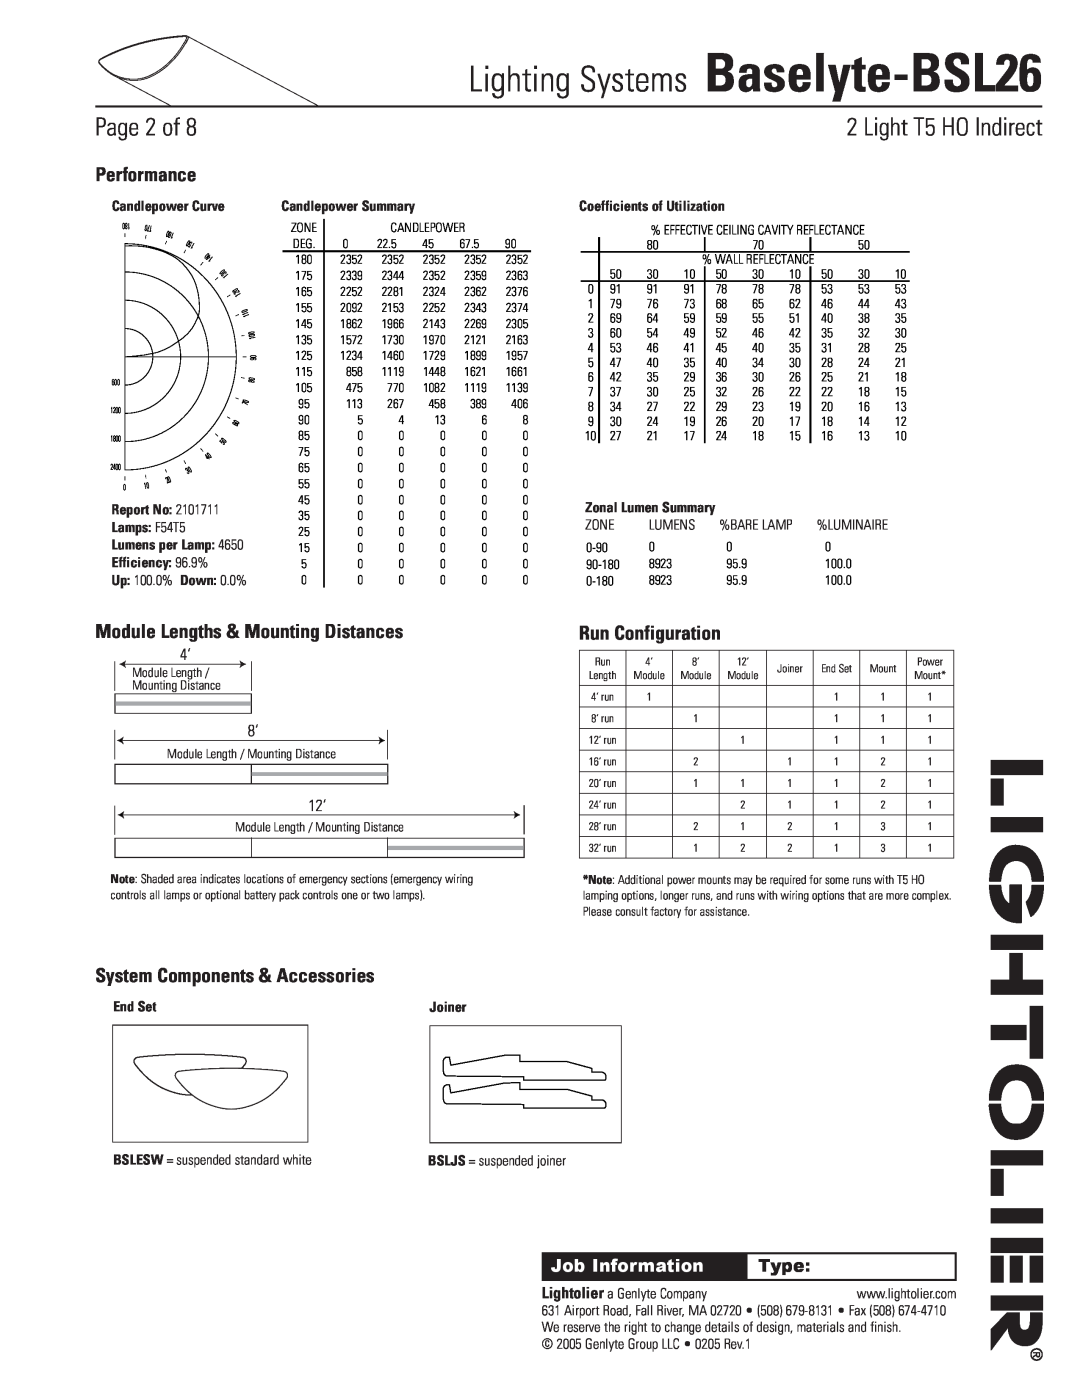 Lightolier Lighting Systems Baselyte-BSL26, Performance, Module Lengths & Mounting Distances, Run Configuration, Type 